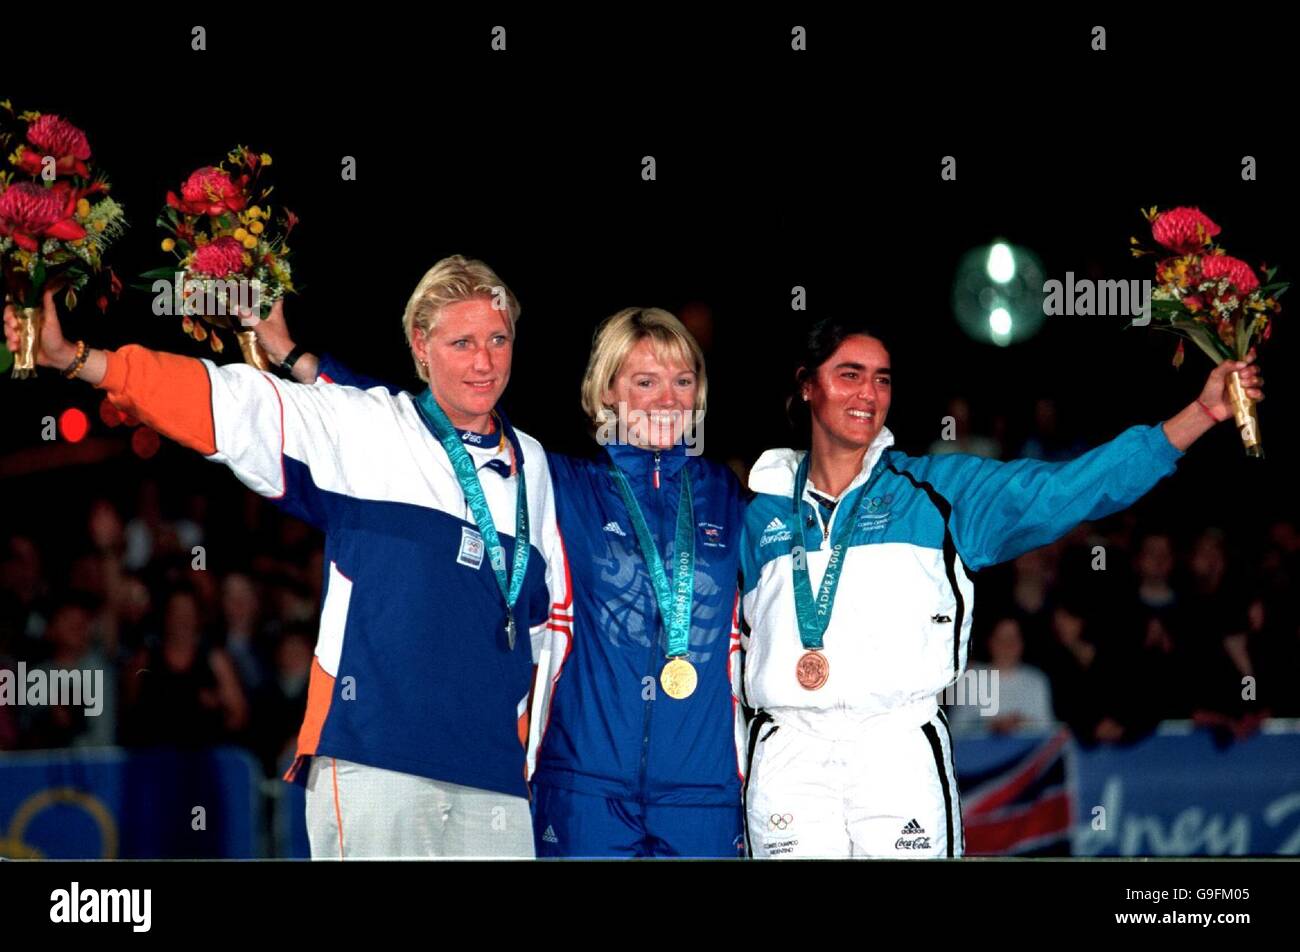 (L-R) The three medalists in the Women's Europe class Margriet Matthysse, Netherlands (silver) Shirley Robertson, Great Britain (gold) and Serena Amato, Argentina (bronze) Stock Photo